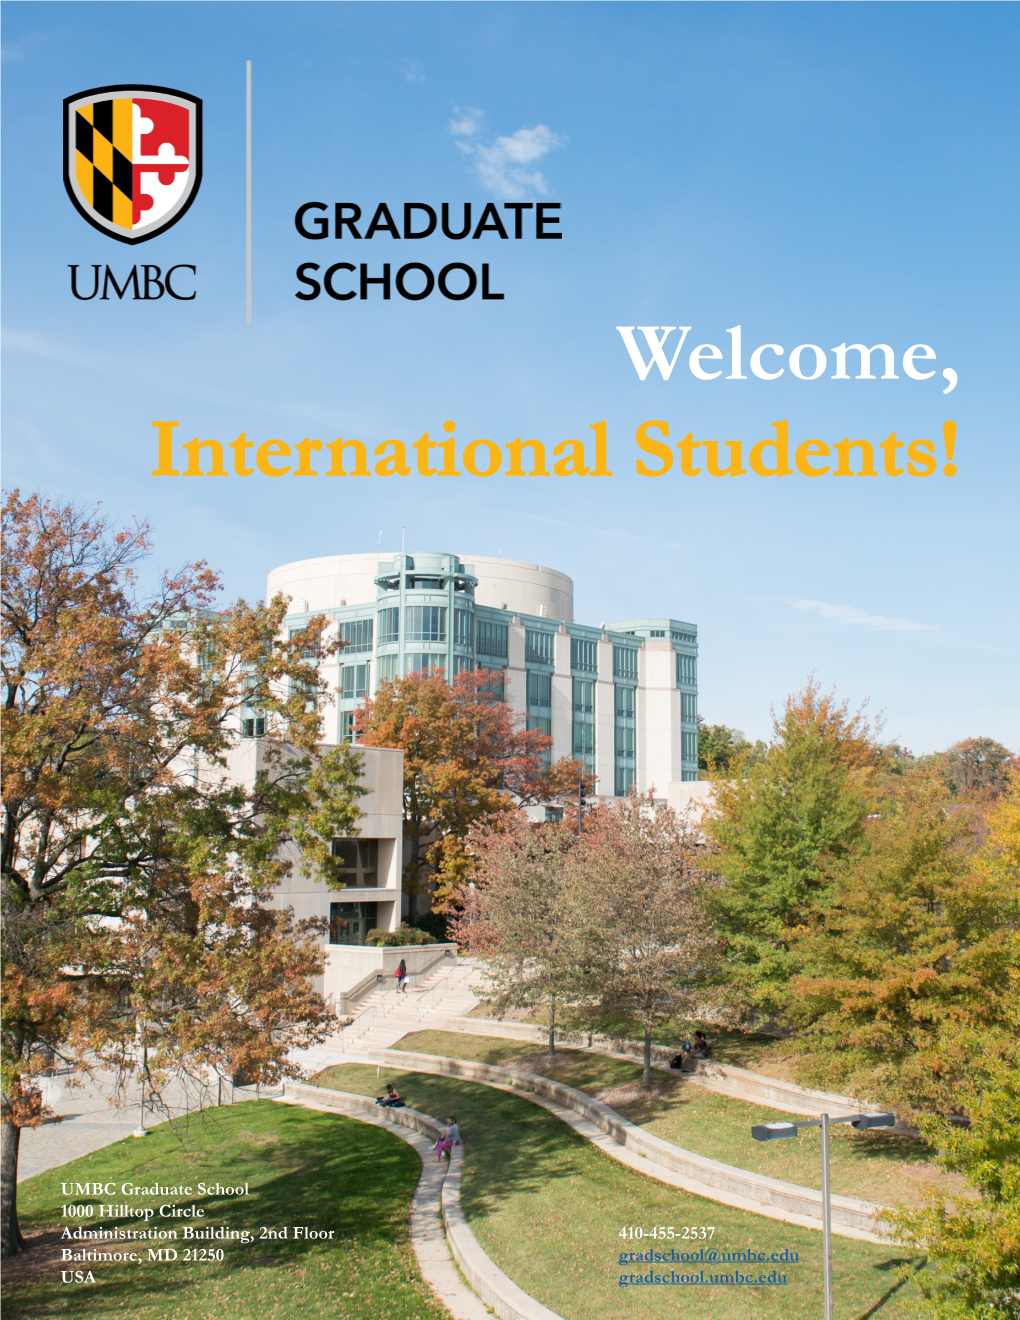 Welcome, International Students!